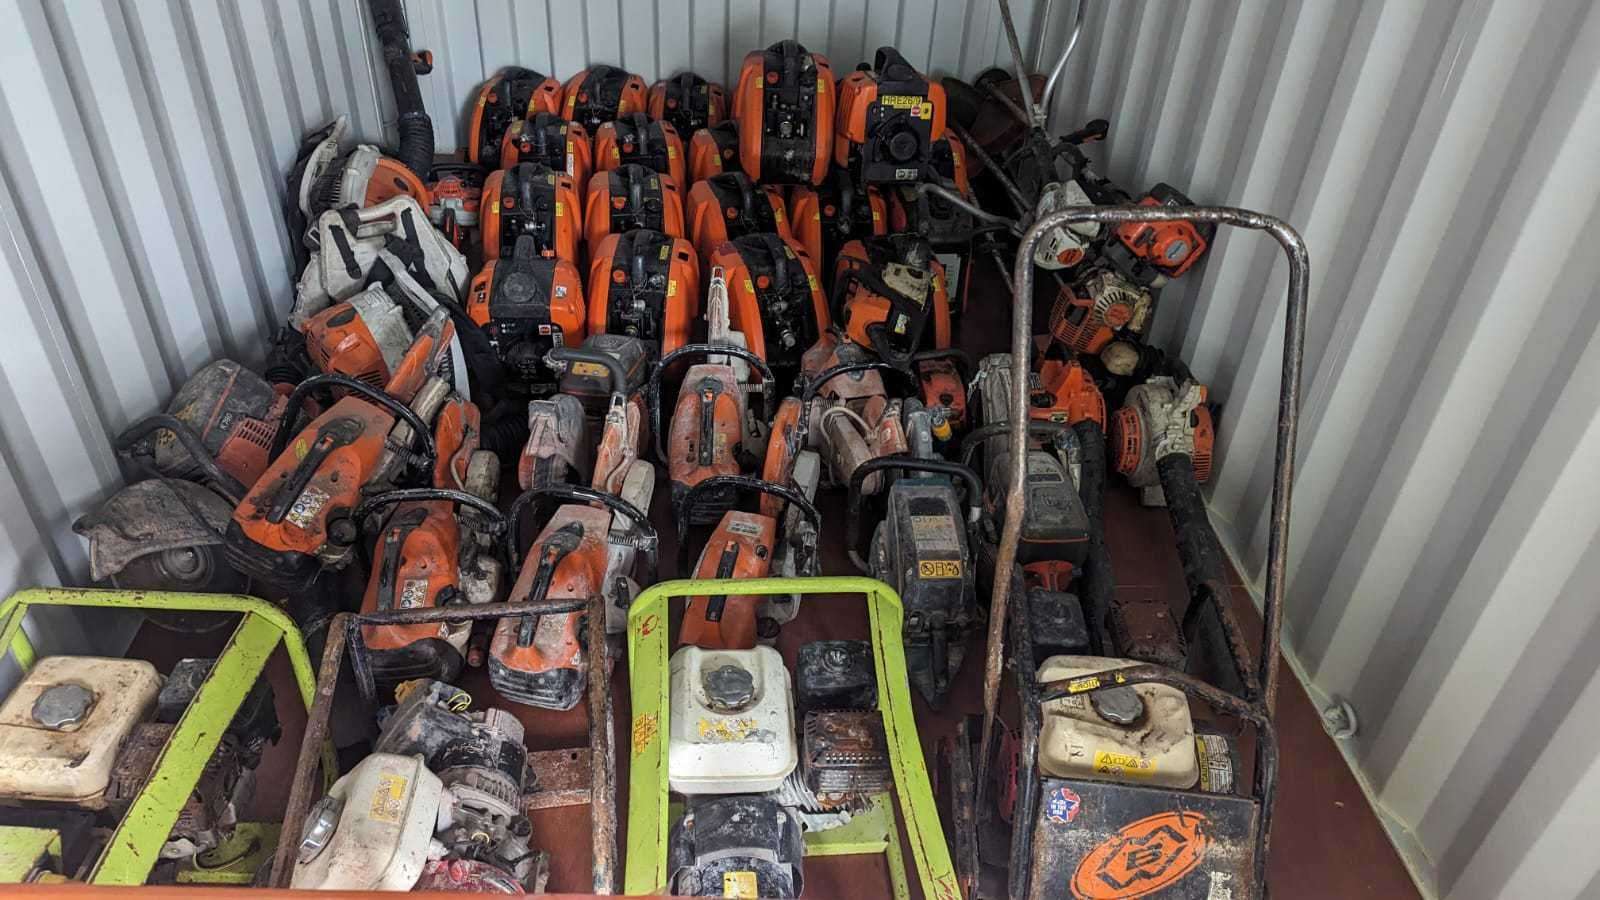 Power tools were among the items suspected stolen. Picture: Kent Police